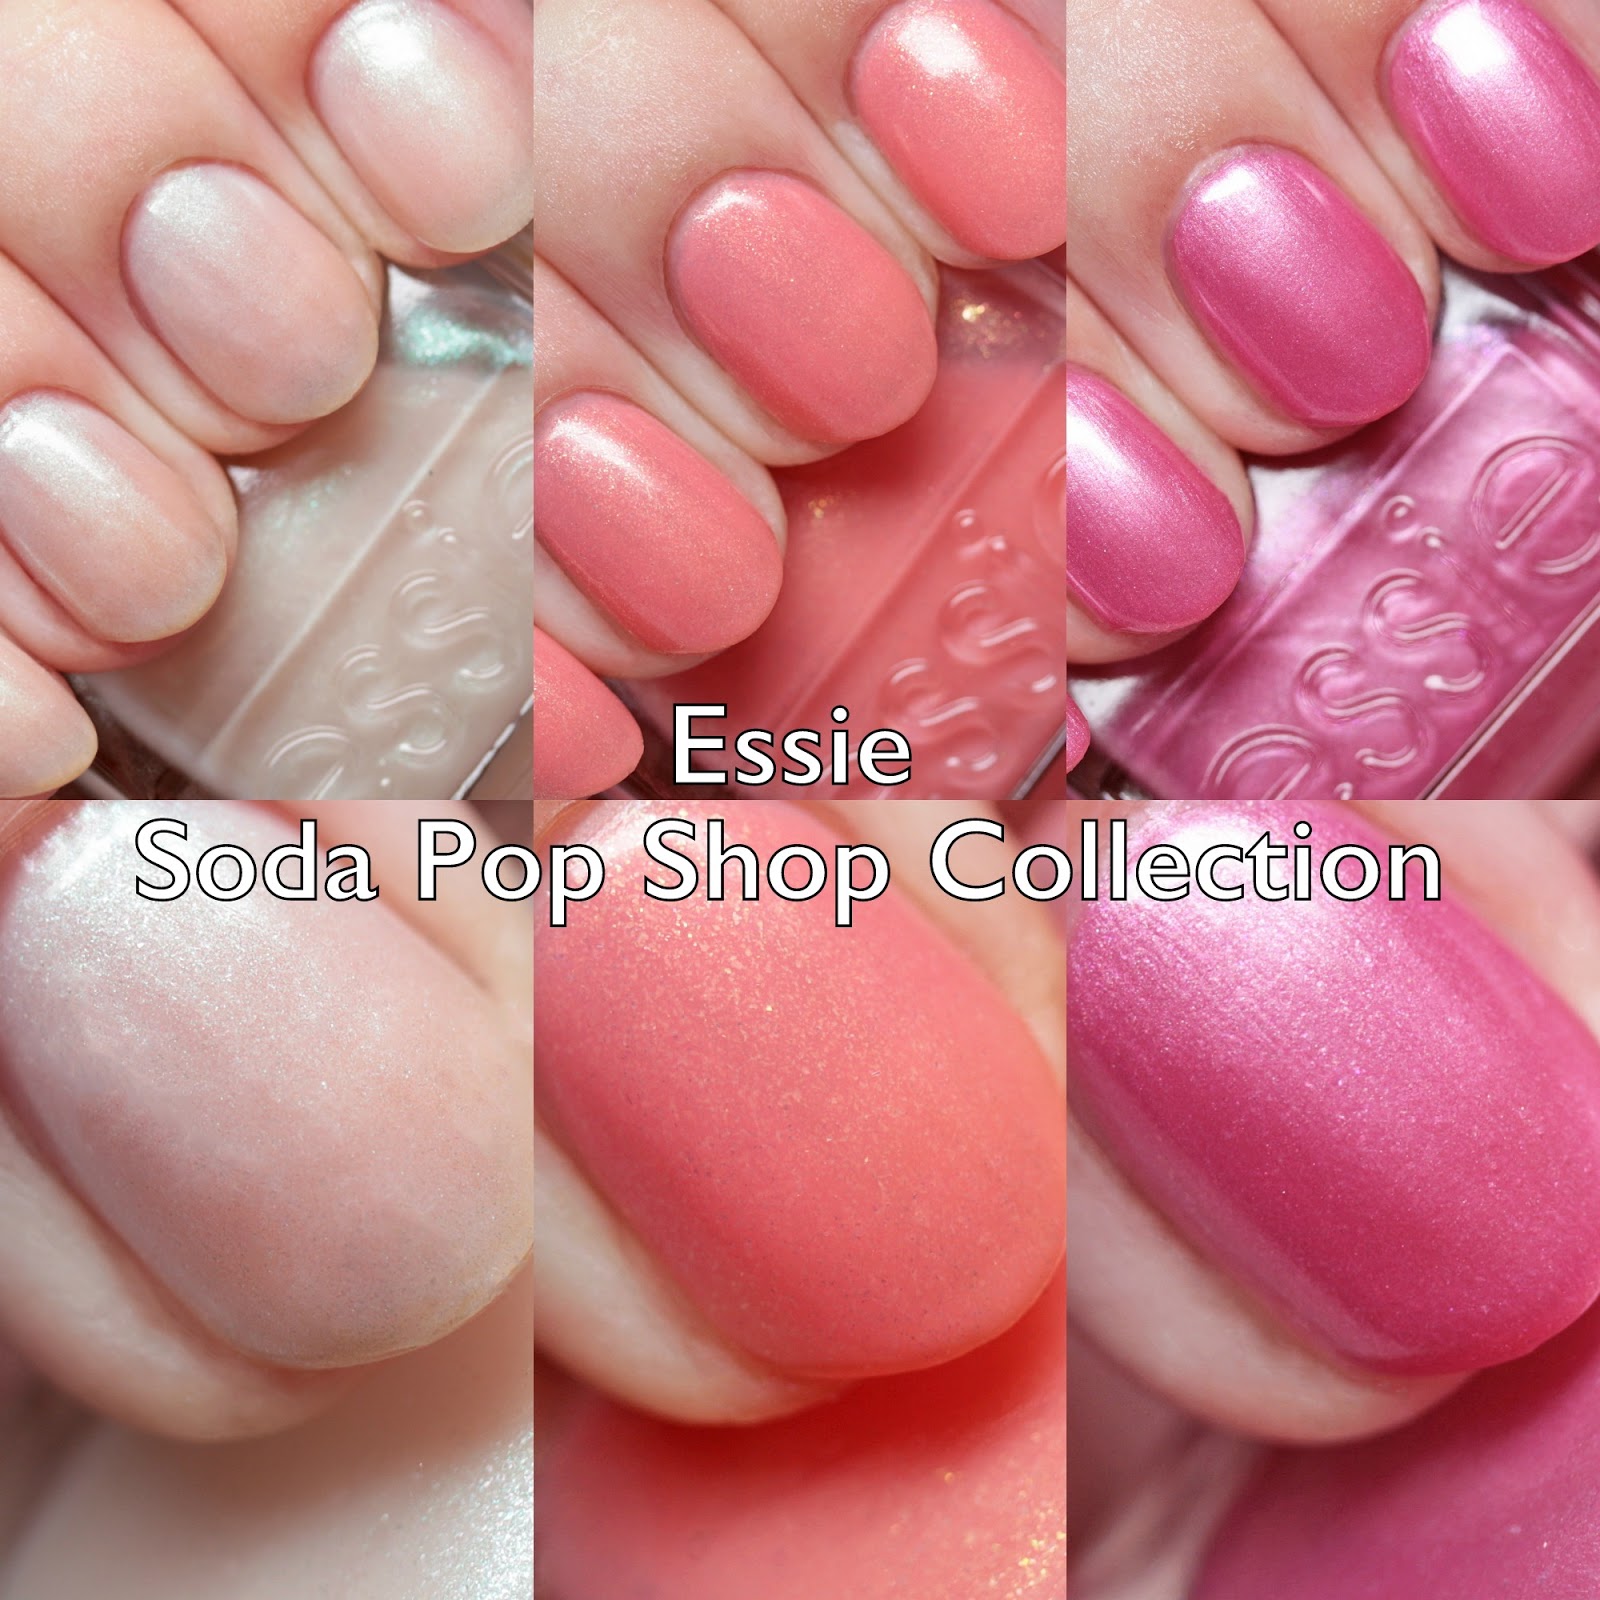 The Polished Hippy: Essie Soda Pop Collection Swatches and Review Part 1